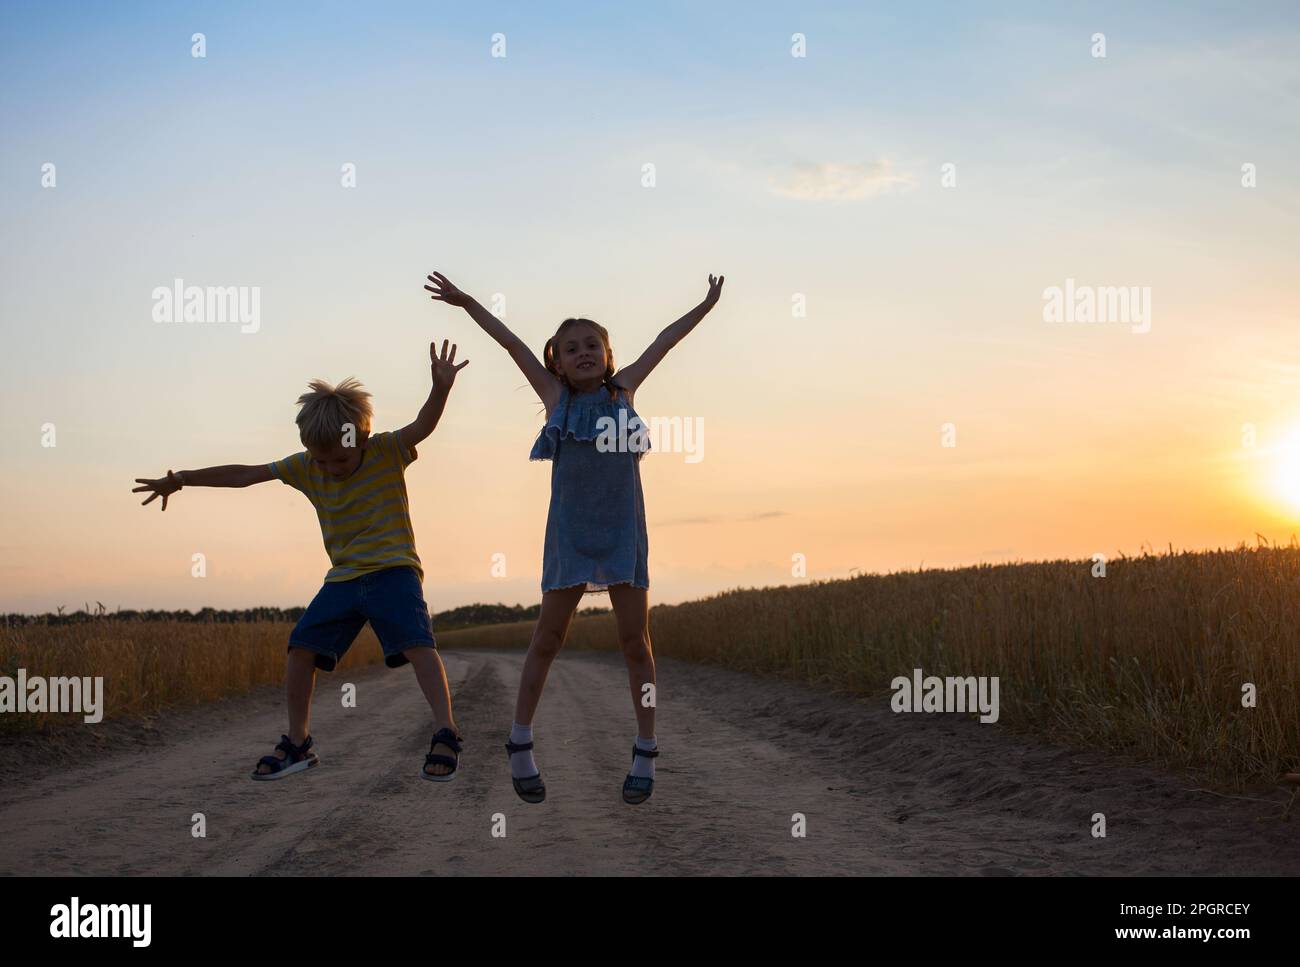 Silhouettes of cheerful girls and boys jumping for joy against the backdrop of the sunset sky. fun, excitement. childhood, summer walks, friendship Stock Photo